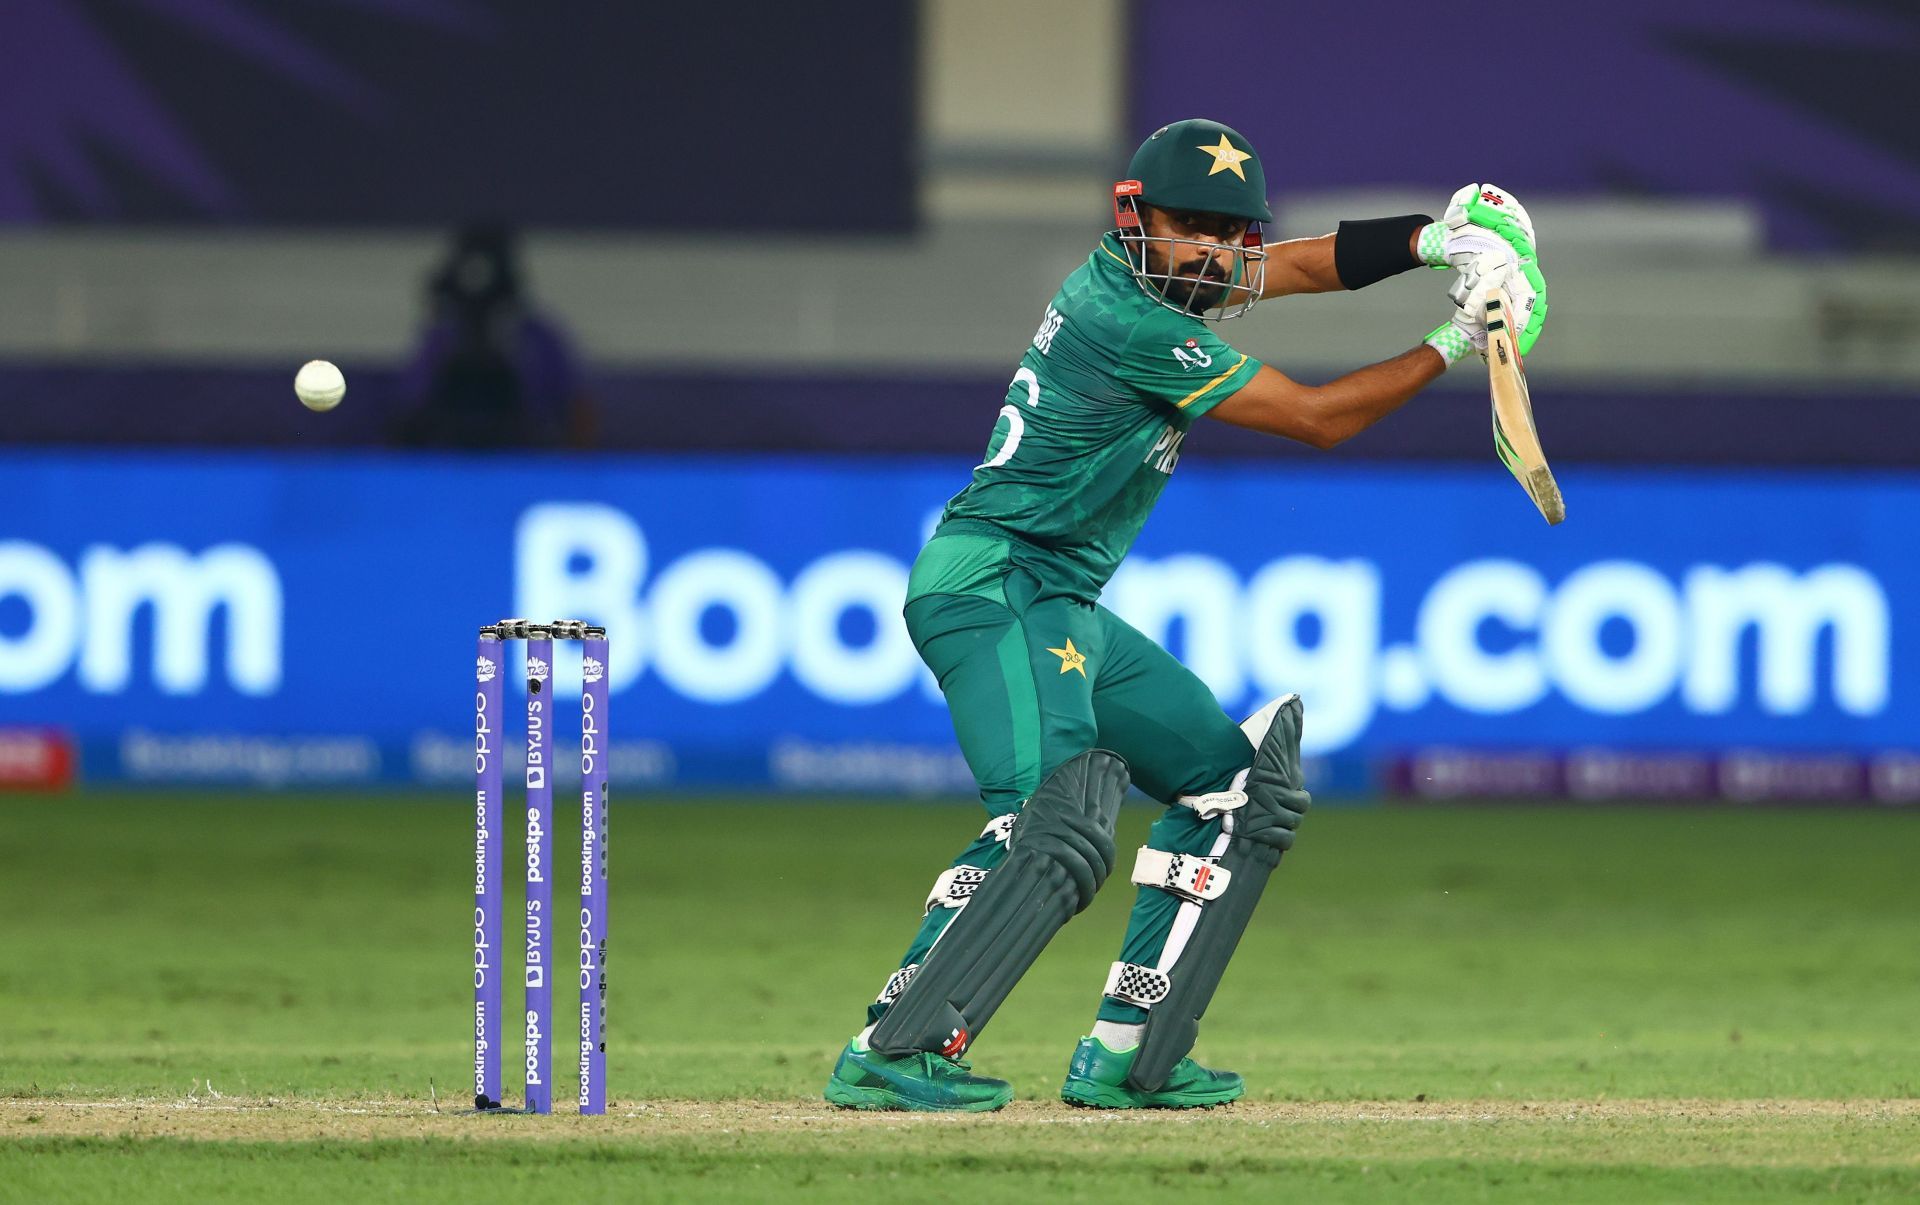 Pakistan will play their last Super 12 match of the ICC T20 World Cup 2021 tomorrow against Scotland